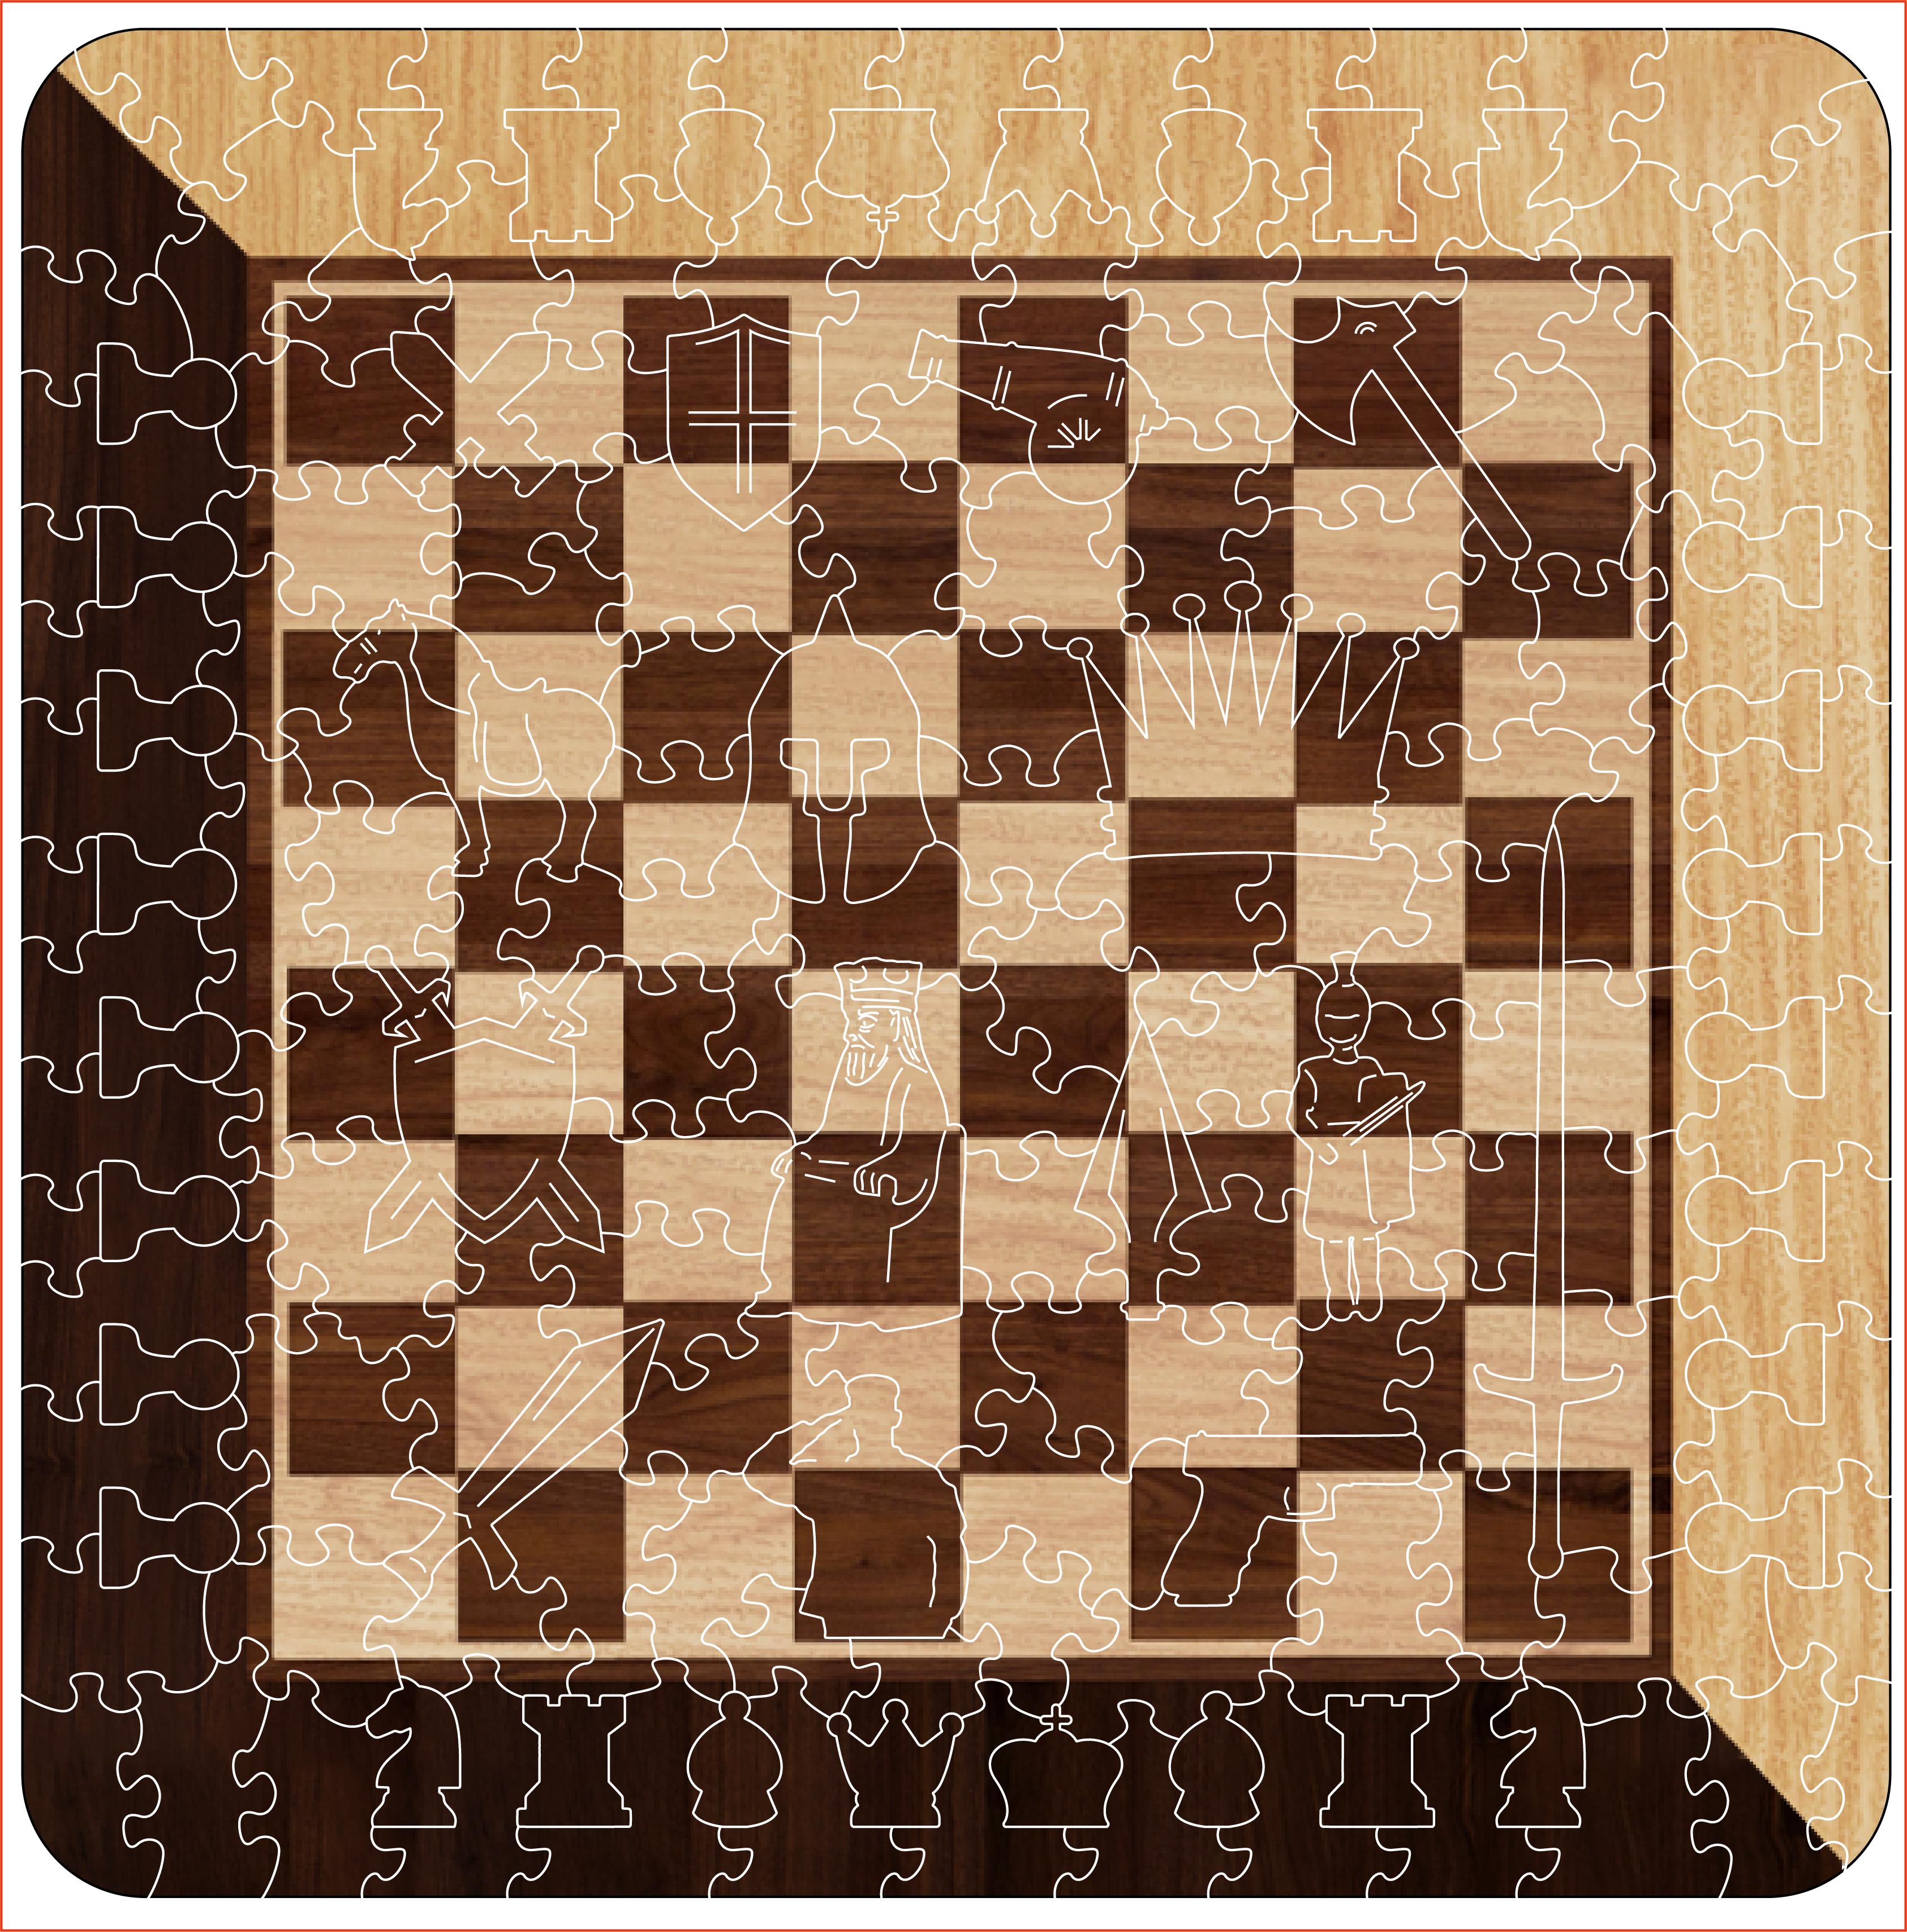 Animal Jigsaw Puzzle > Wooden Jigsaw Puzzle > Jigsaw Puzzle A3 Chess - Jigsaw Puzzle